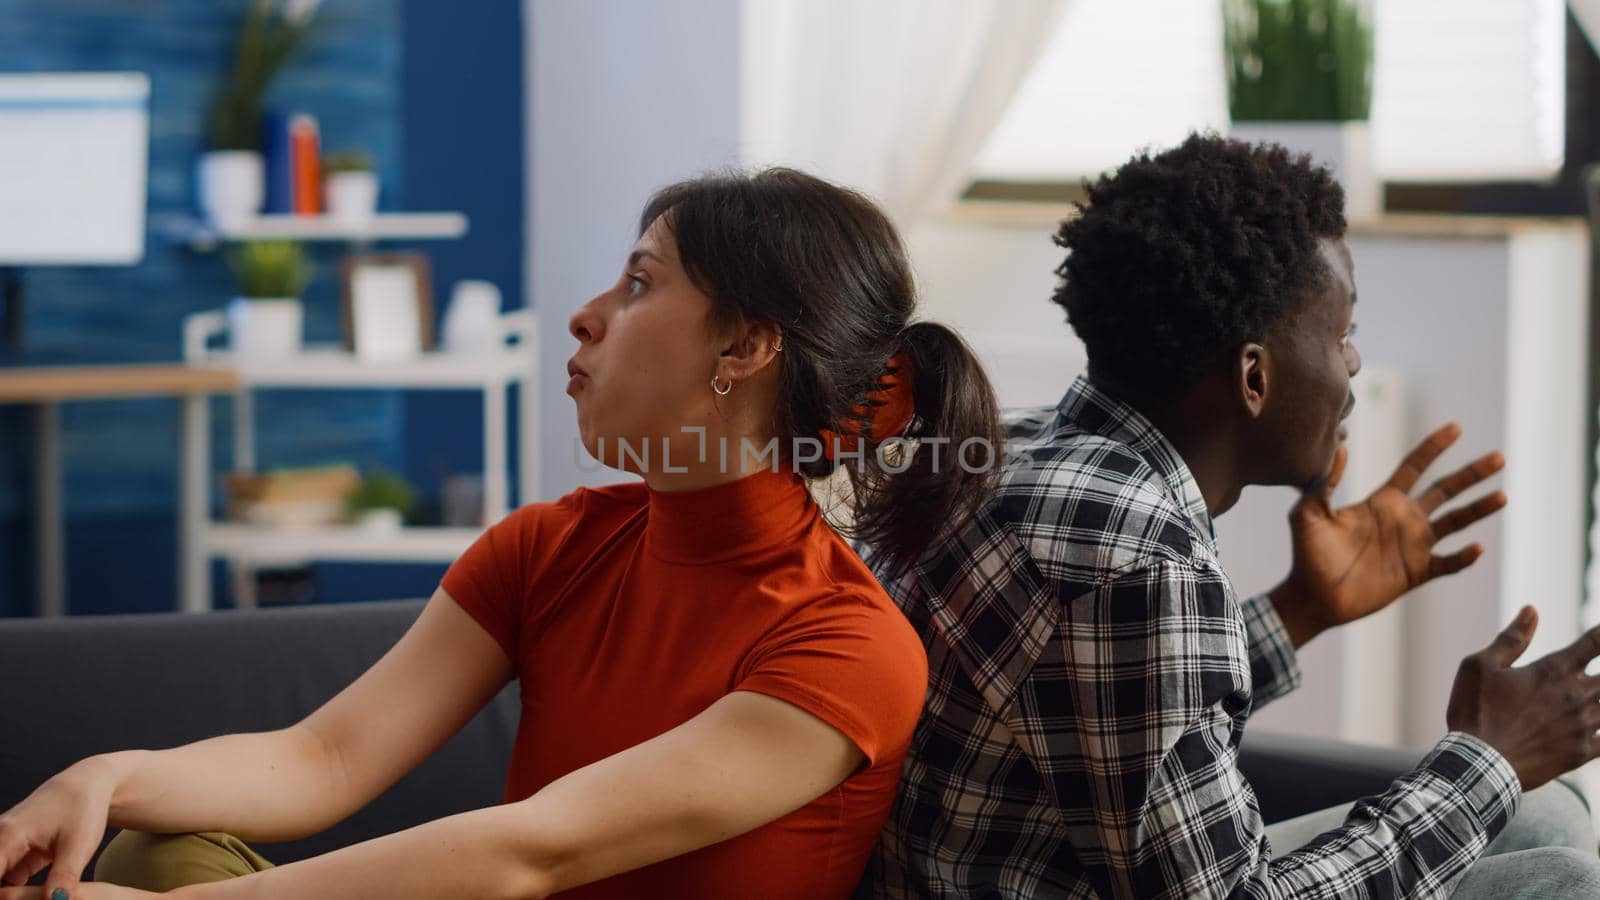 Irritated interracial couple getting into argument on sofa at home. Multi ethnic partners fighting, having relationship problems in living room. Young people sitting on couch yelling